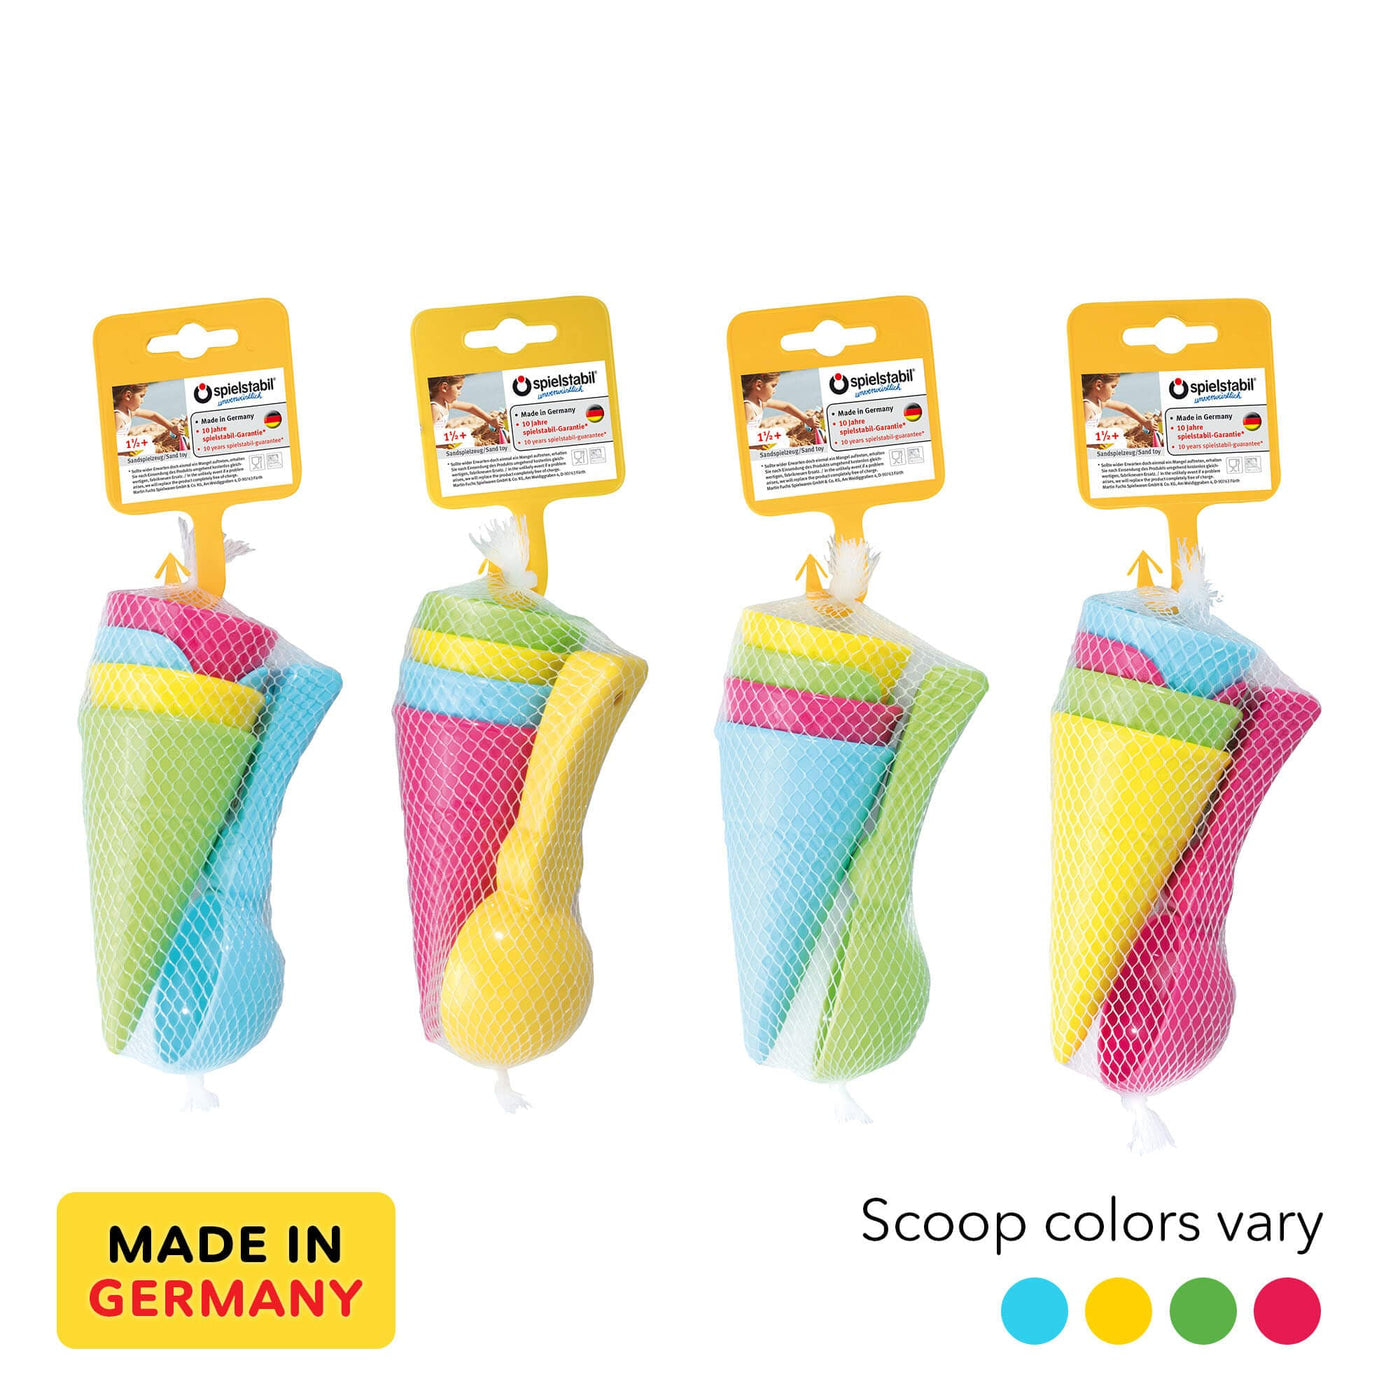 Ice Cream 5 Piece Set with 4 Cones and a Scoop - HABA USA